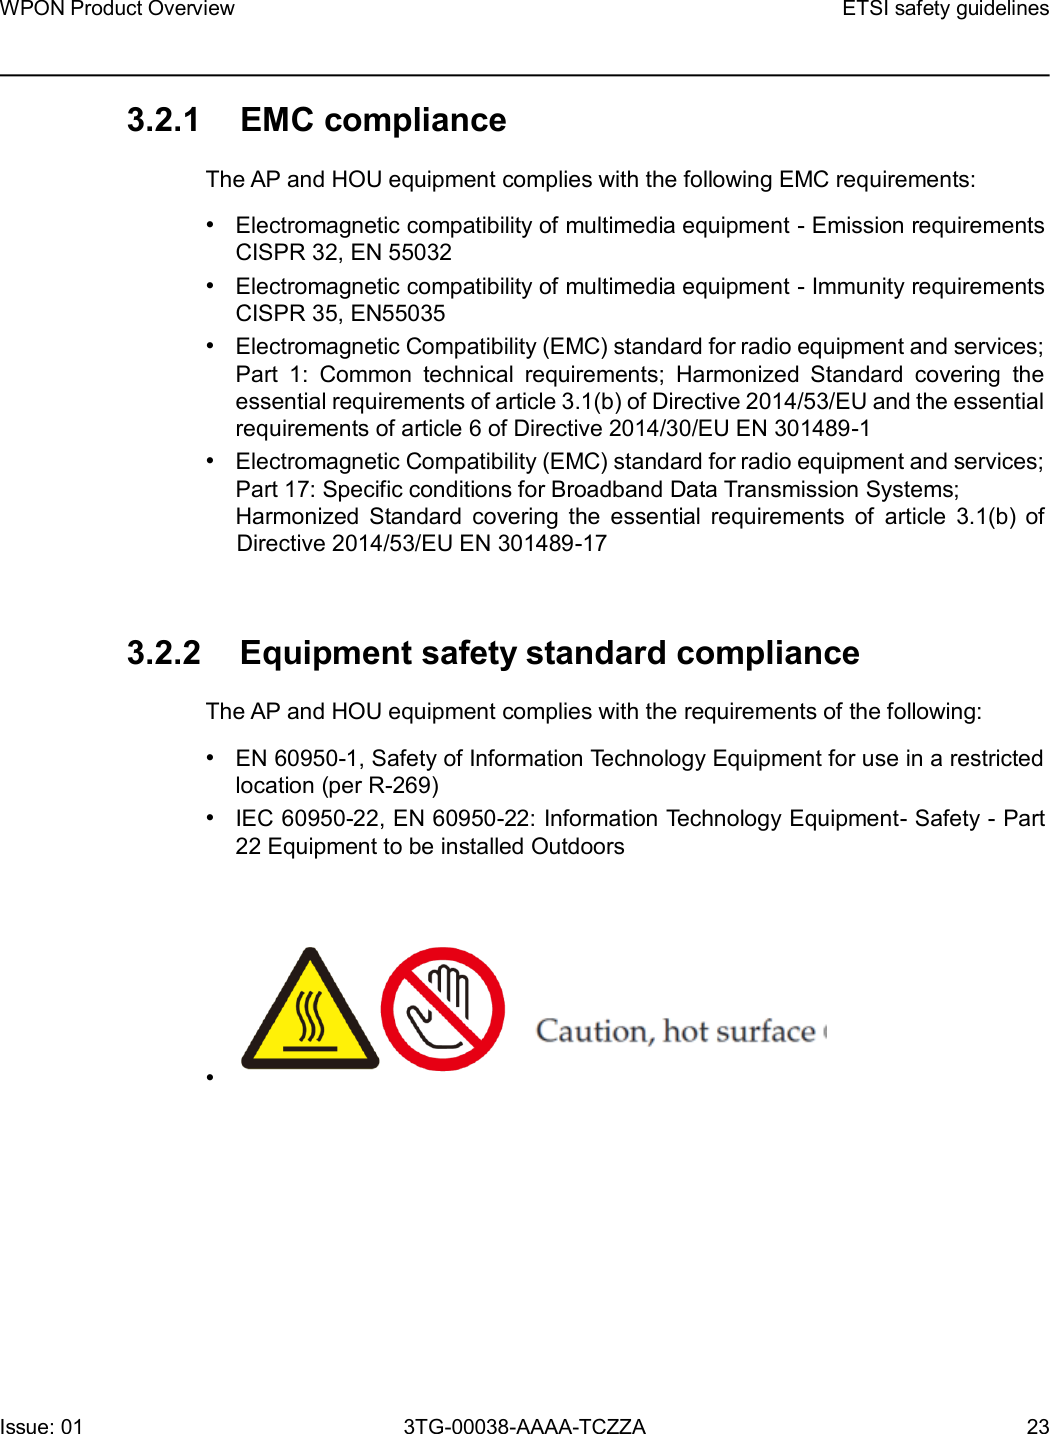 Page 23 of Nokia Bell 7577WPONAPDC WPON User Manual WPON Product Overview